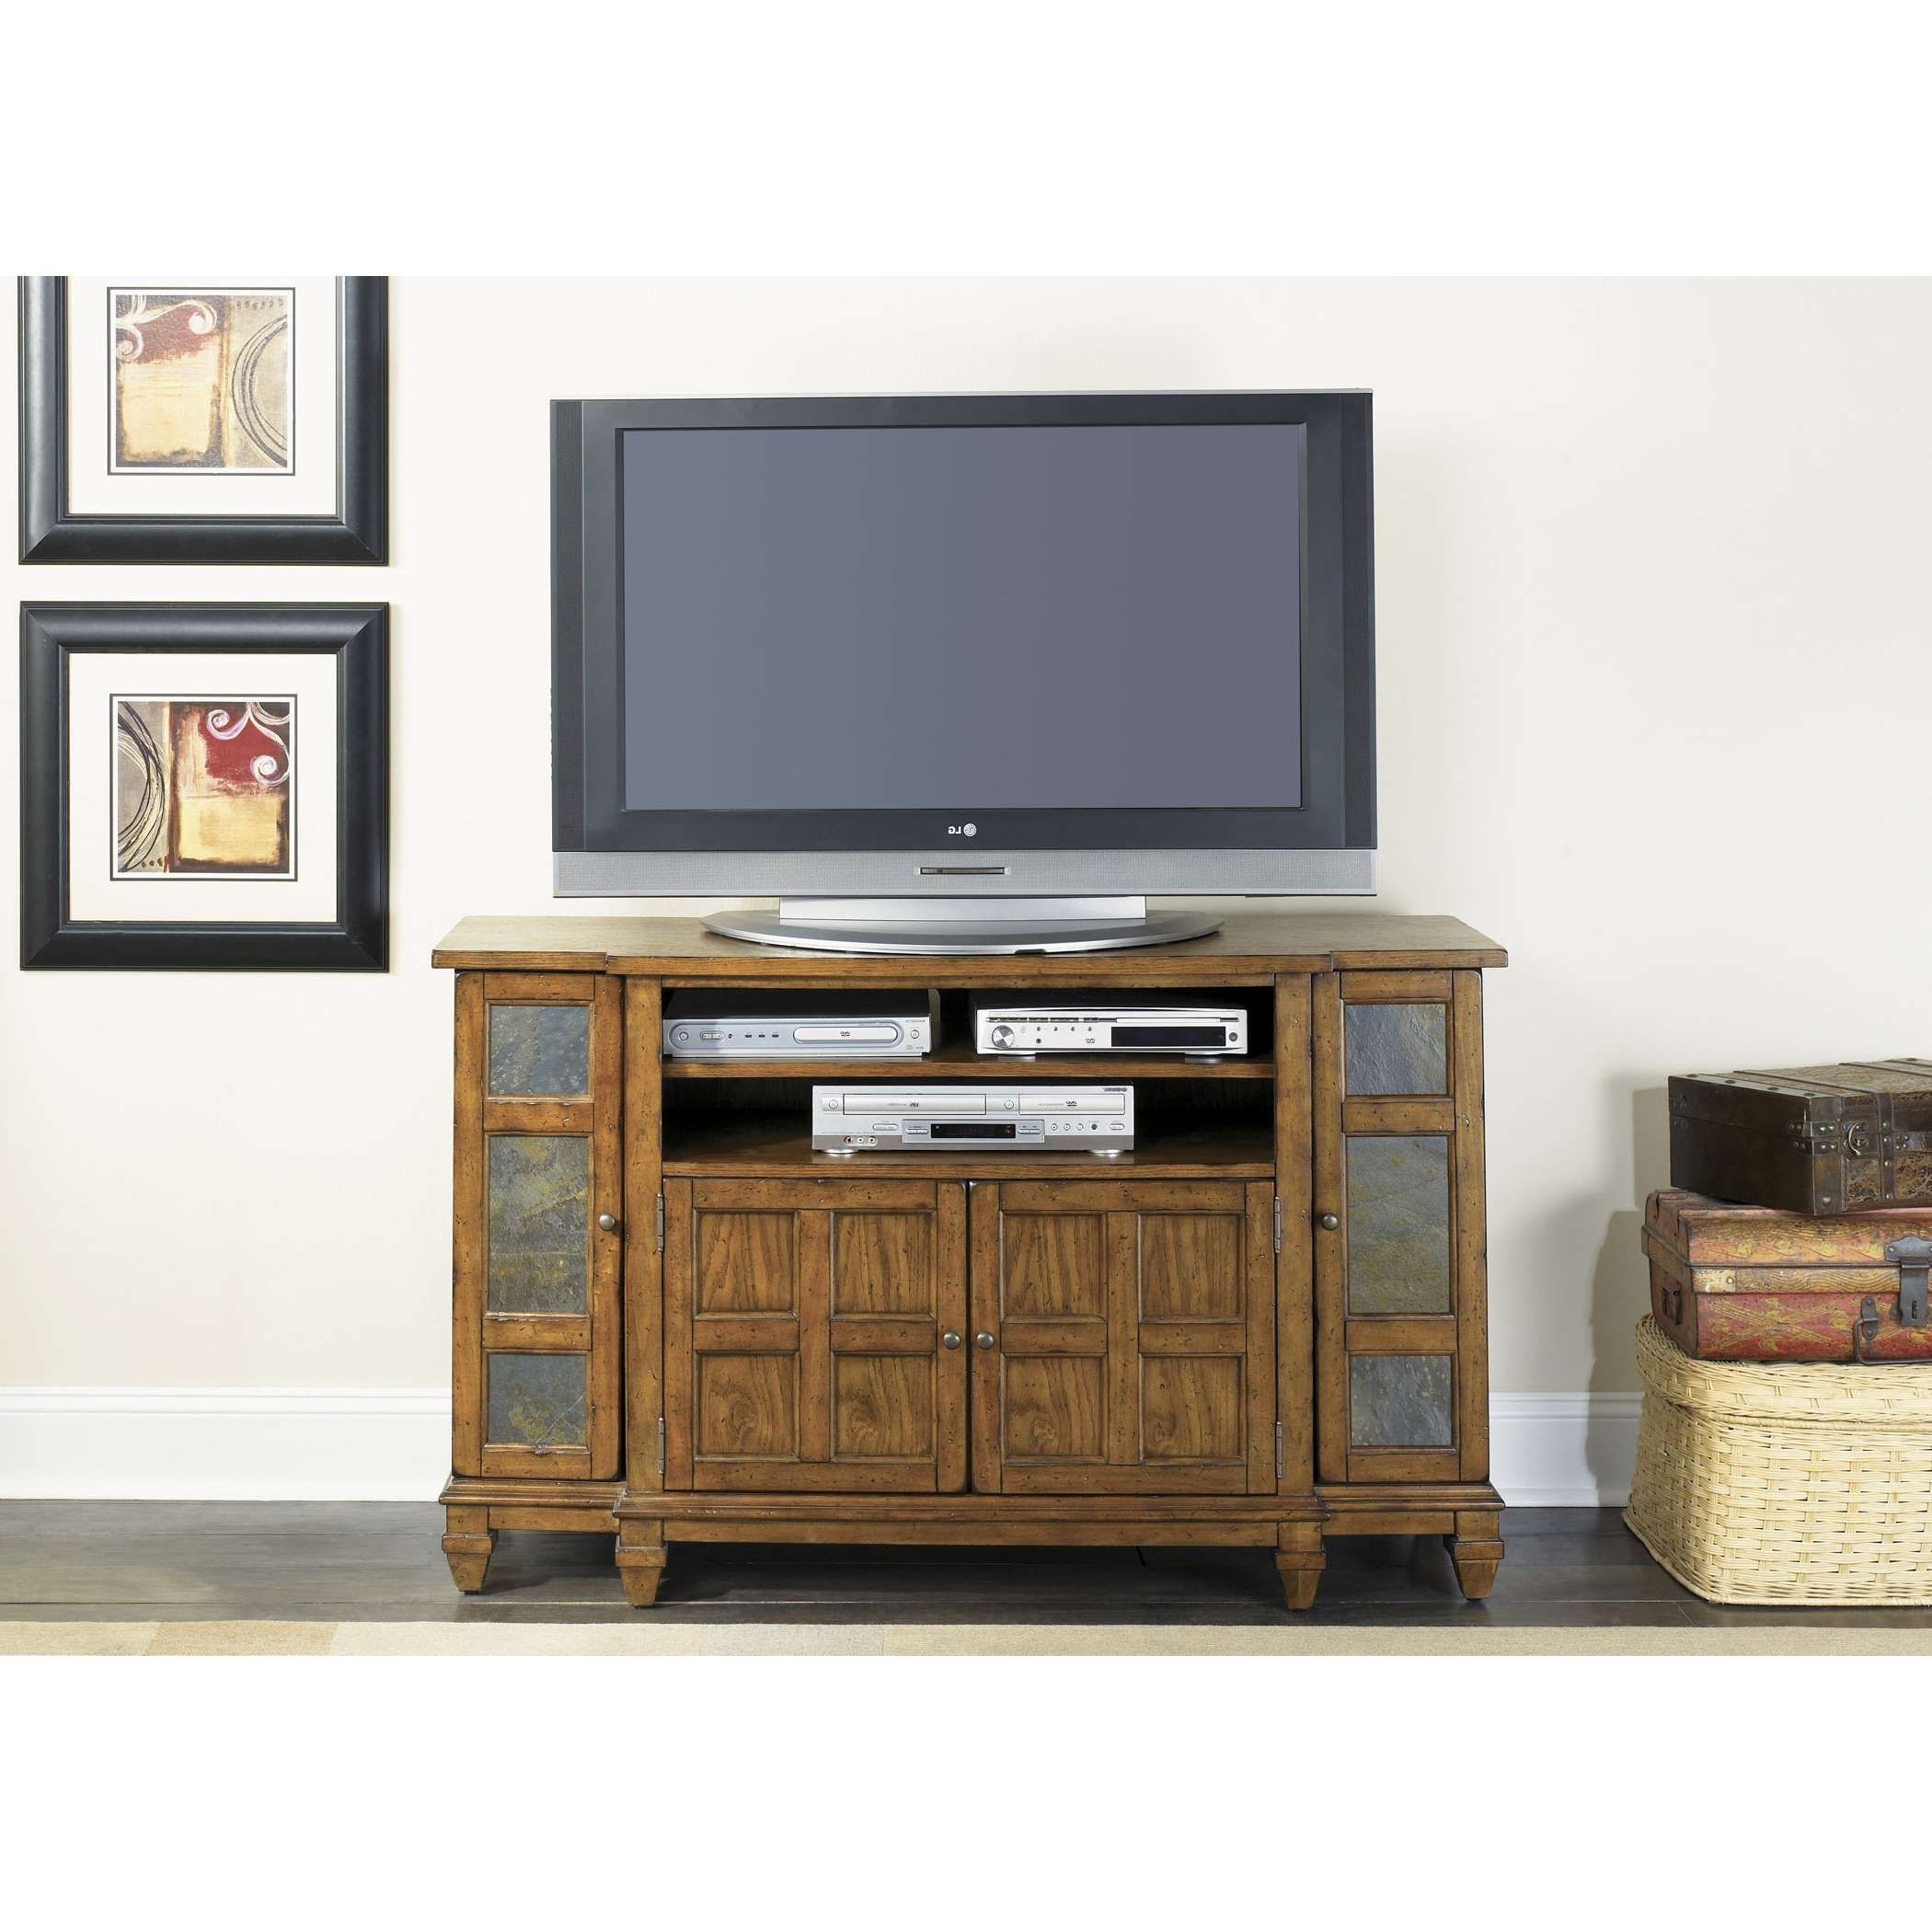 Awesome Highboy Tv Stands 69 For Modern Home Decor Inspiration Throughout Highboy Tv Stands (View 11 of 15)